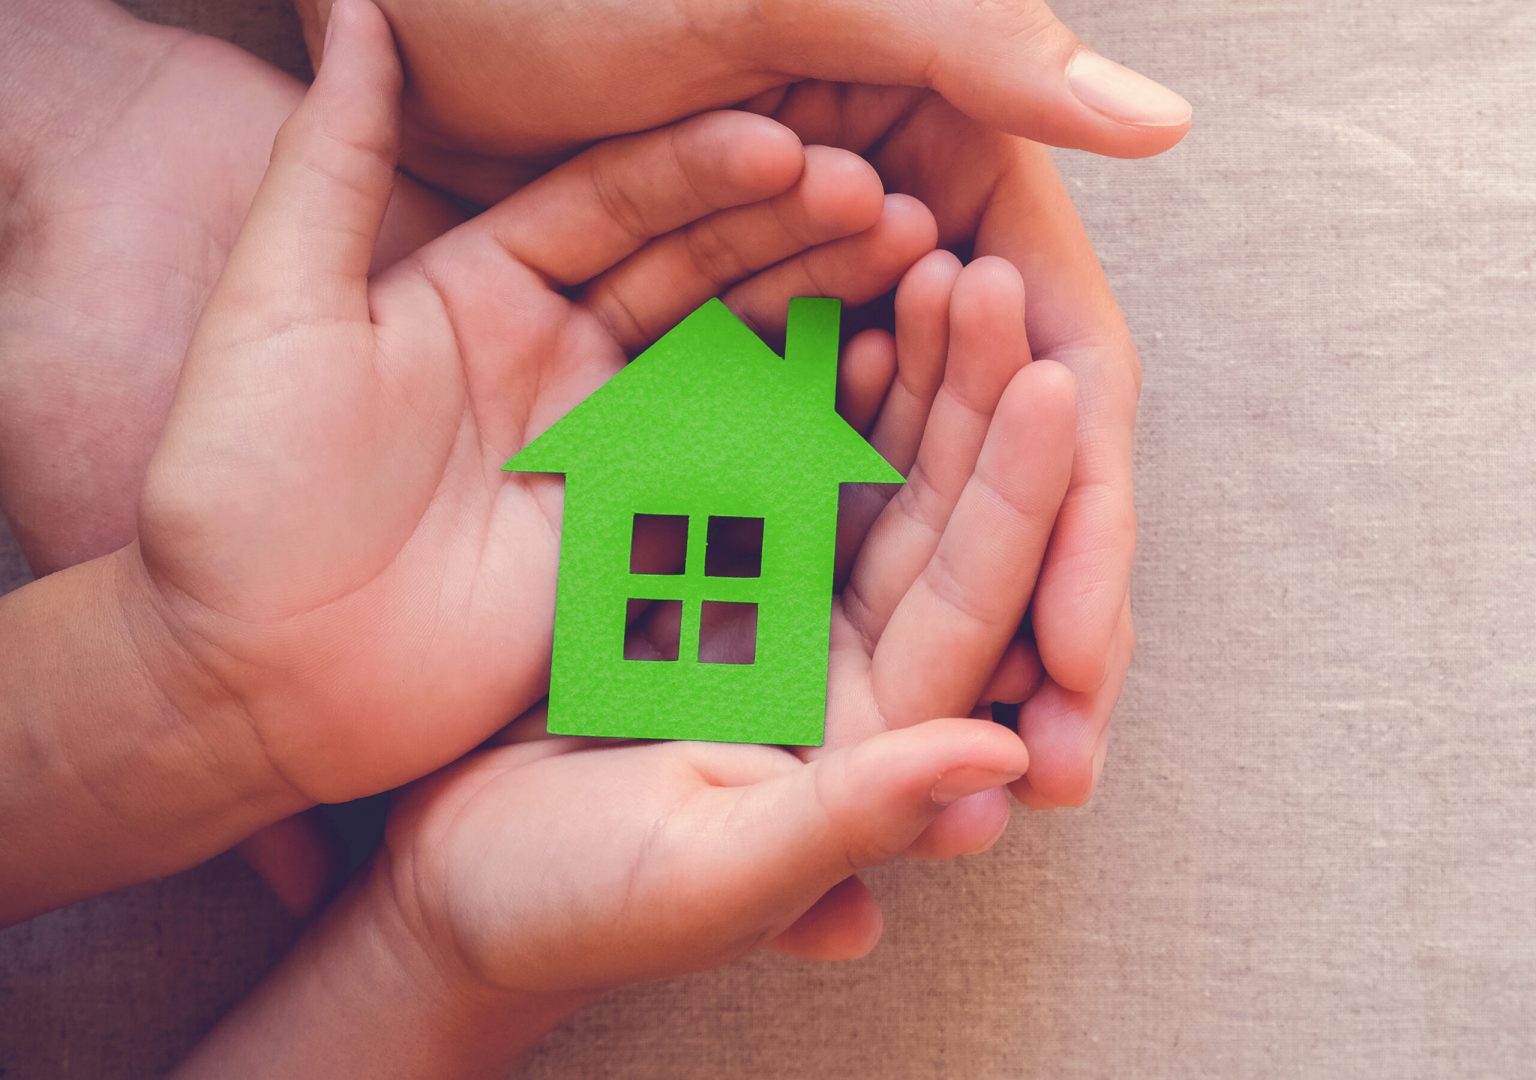 Adult and child hands holding green paper house, eco house concept